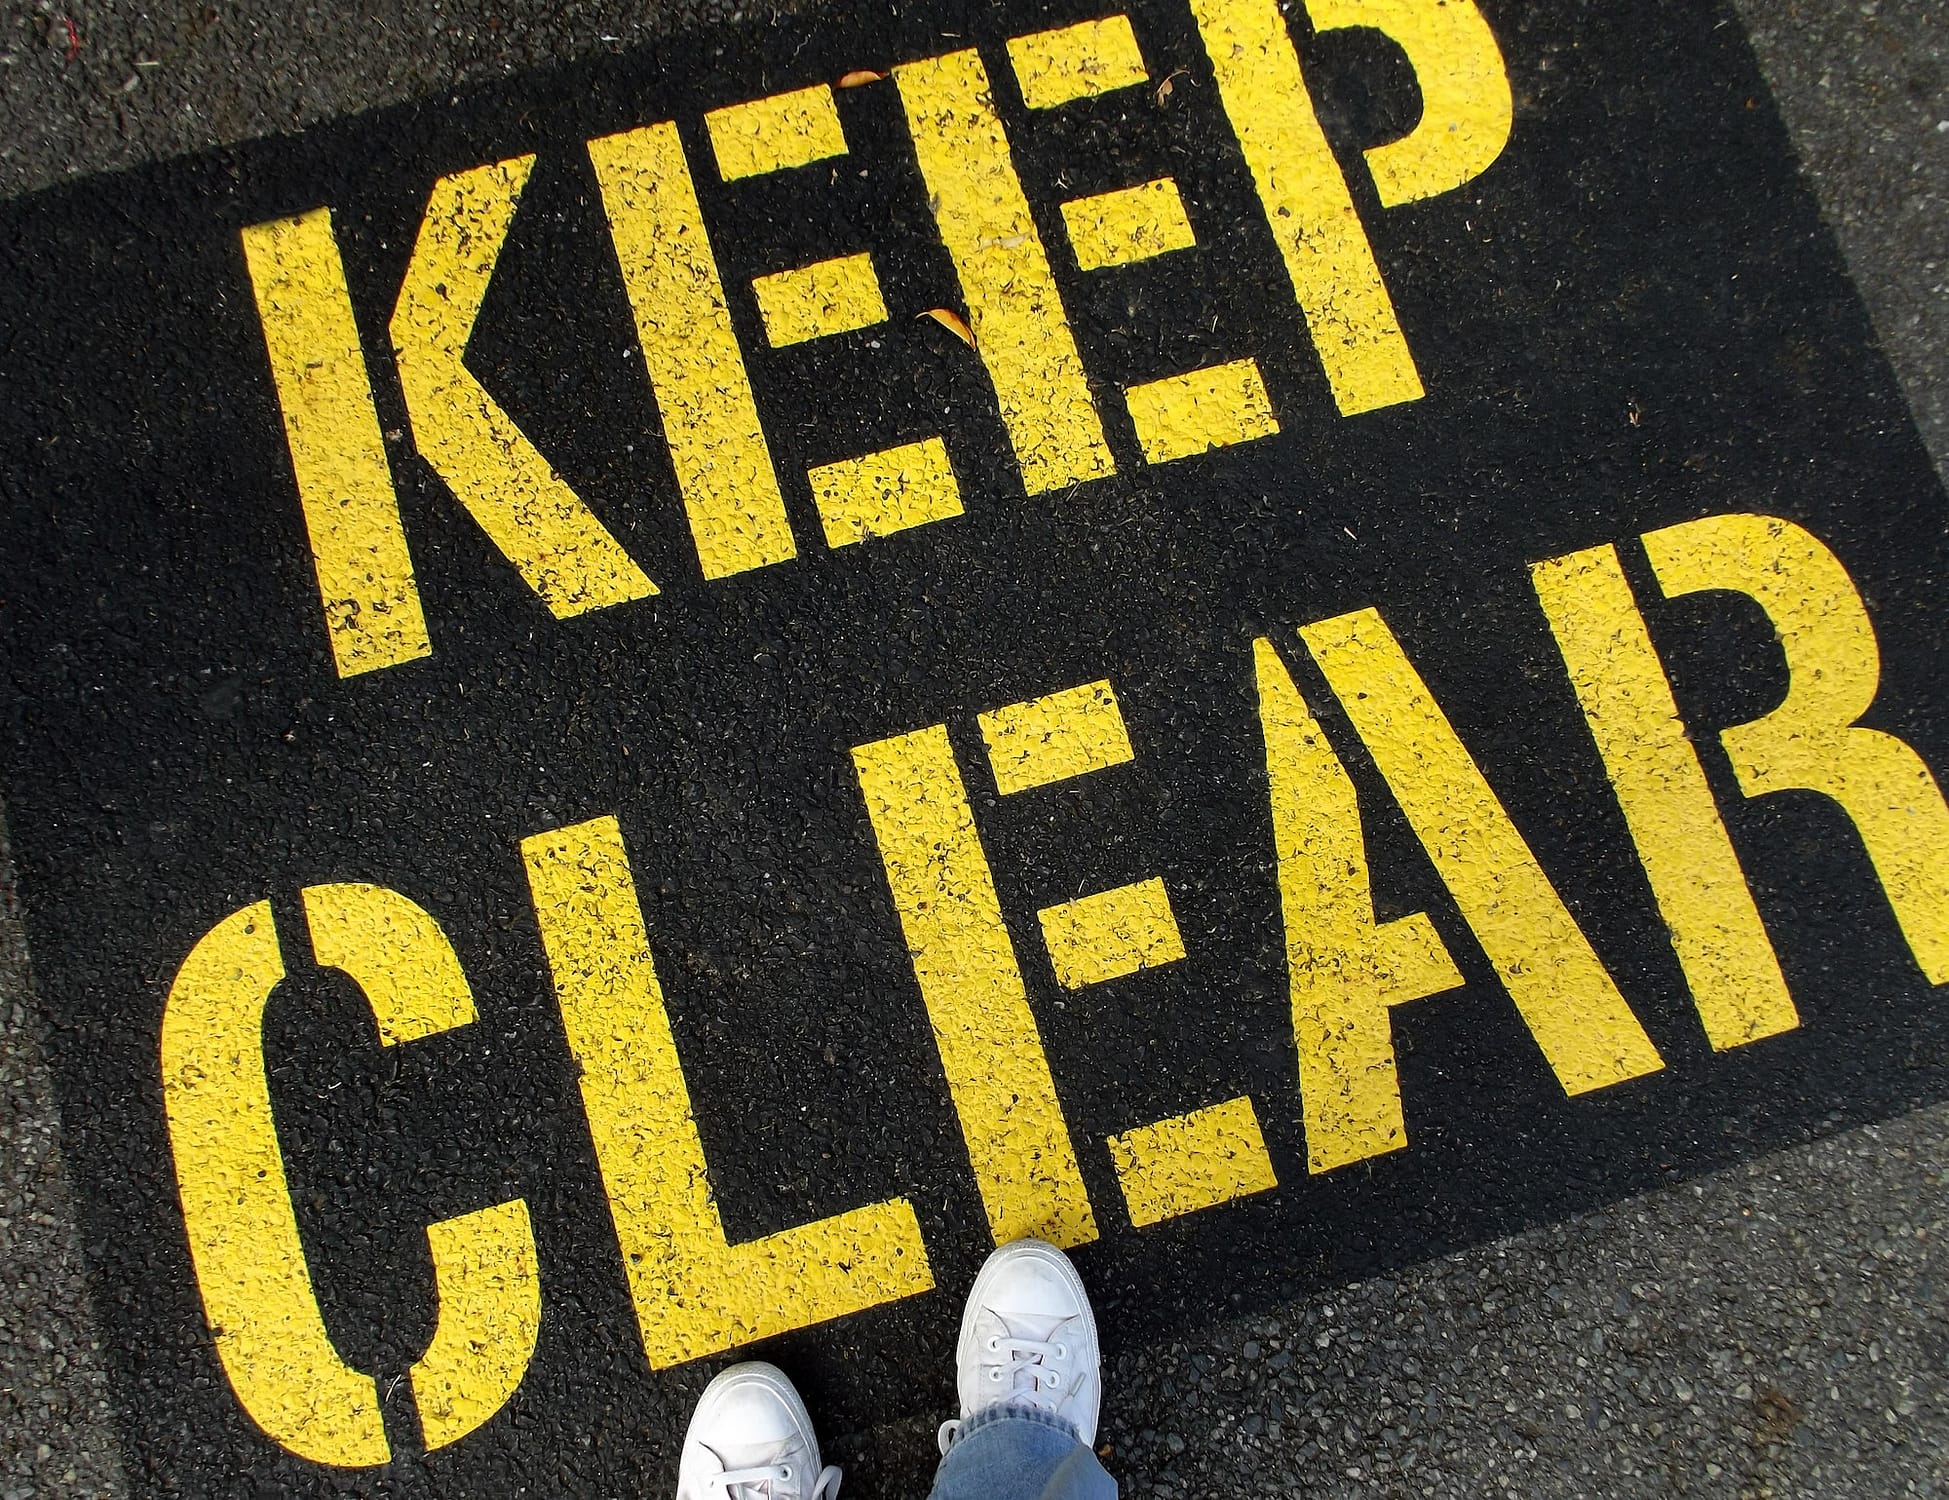 Keep Clear sign on the ground